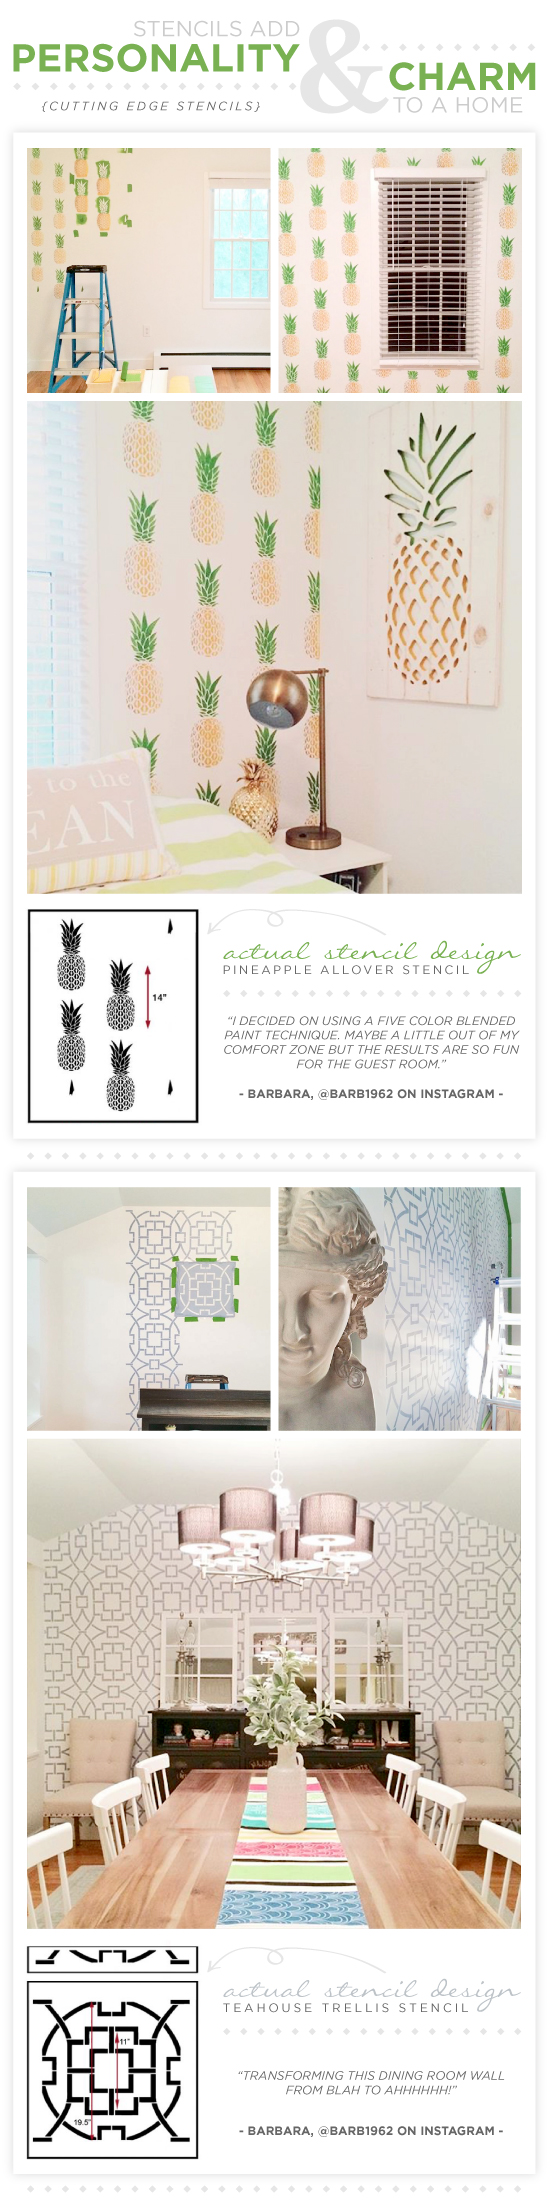 Cutting Edge Stencils are a DIY solution to wallpaper and can personalize your abode without breaking the bank. http://www.cuttingedgestencils.com/tea-house-trellis-allover-stencil-pattern.html